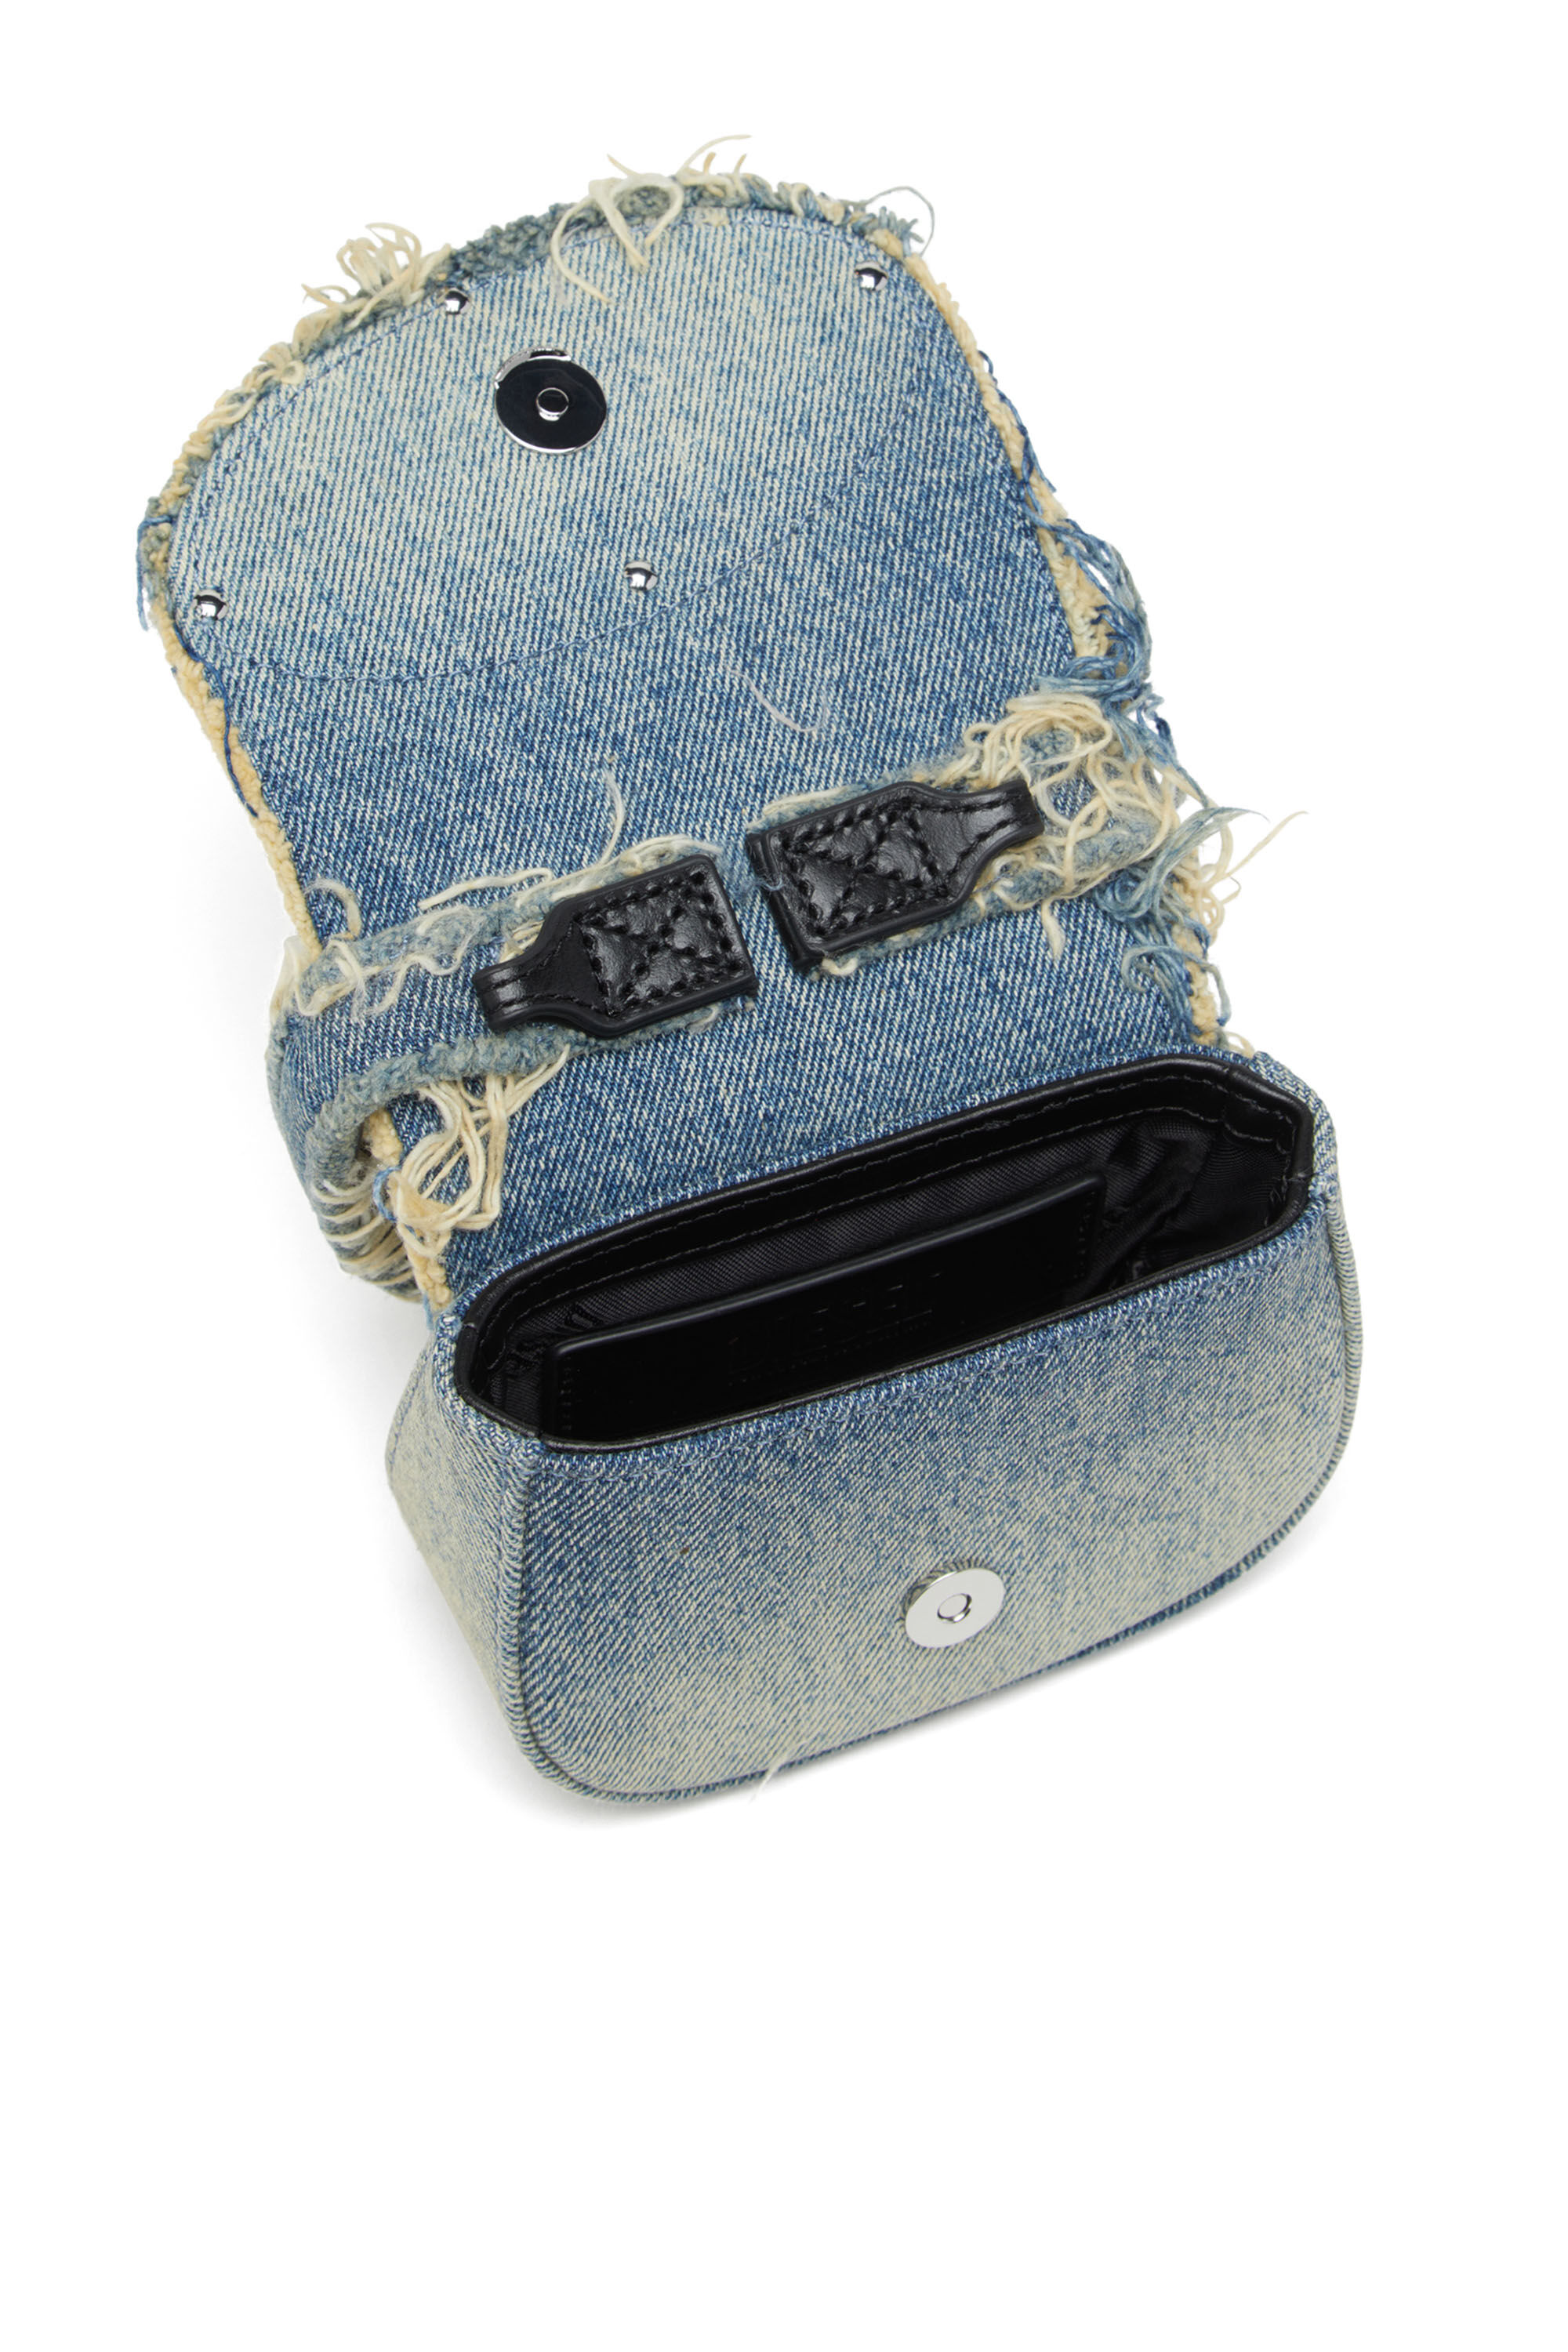 Diesel - 1DR XS, Woman 1DR XS-Iconic mini bag in denim and crystals in Blue - Image 5